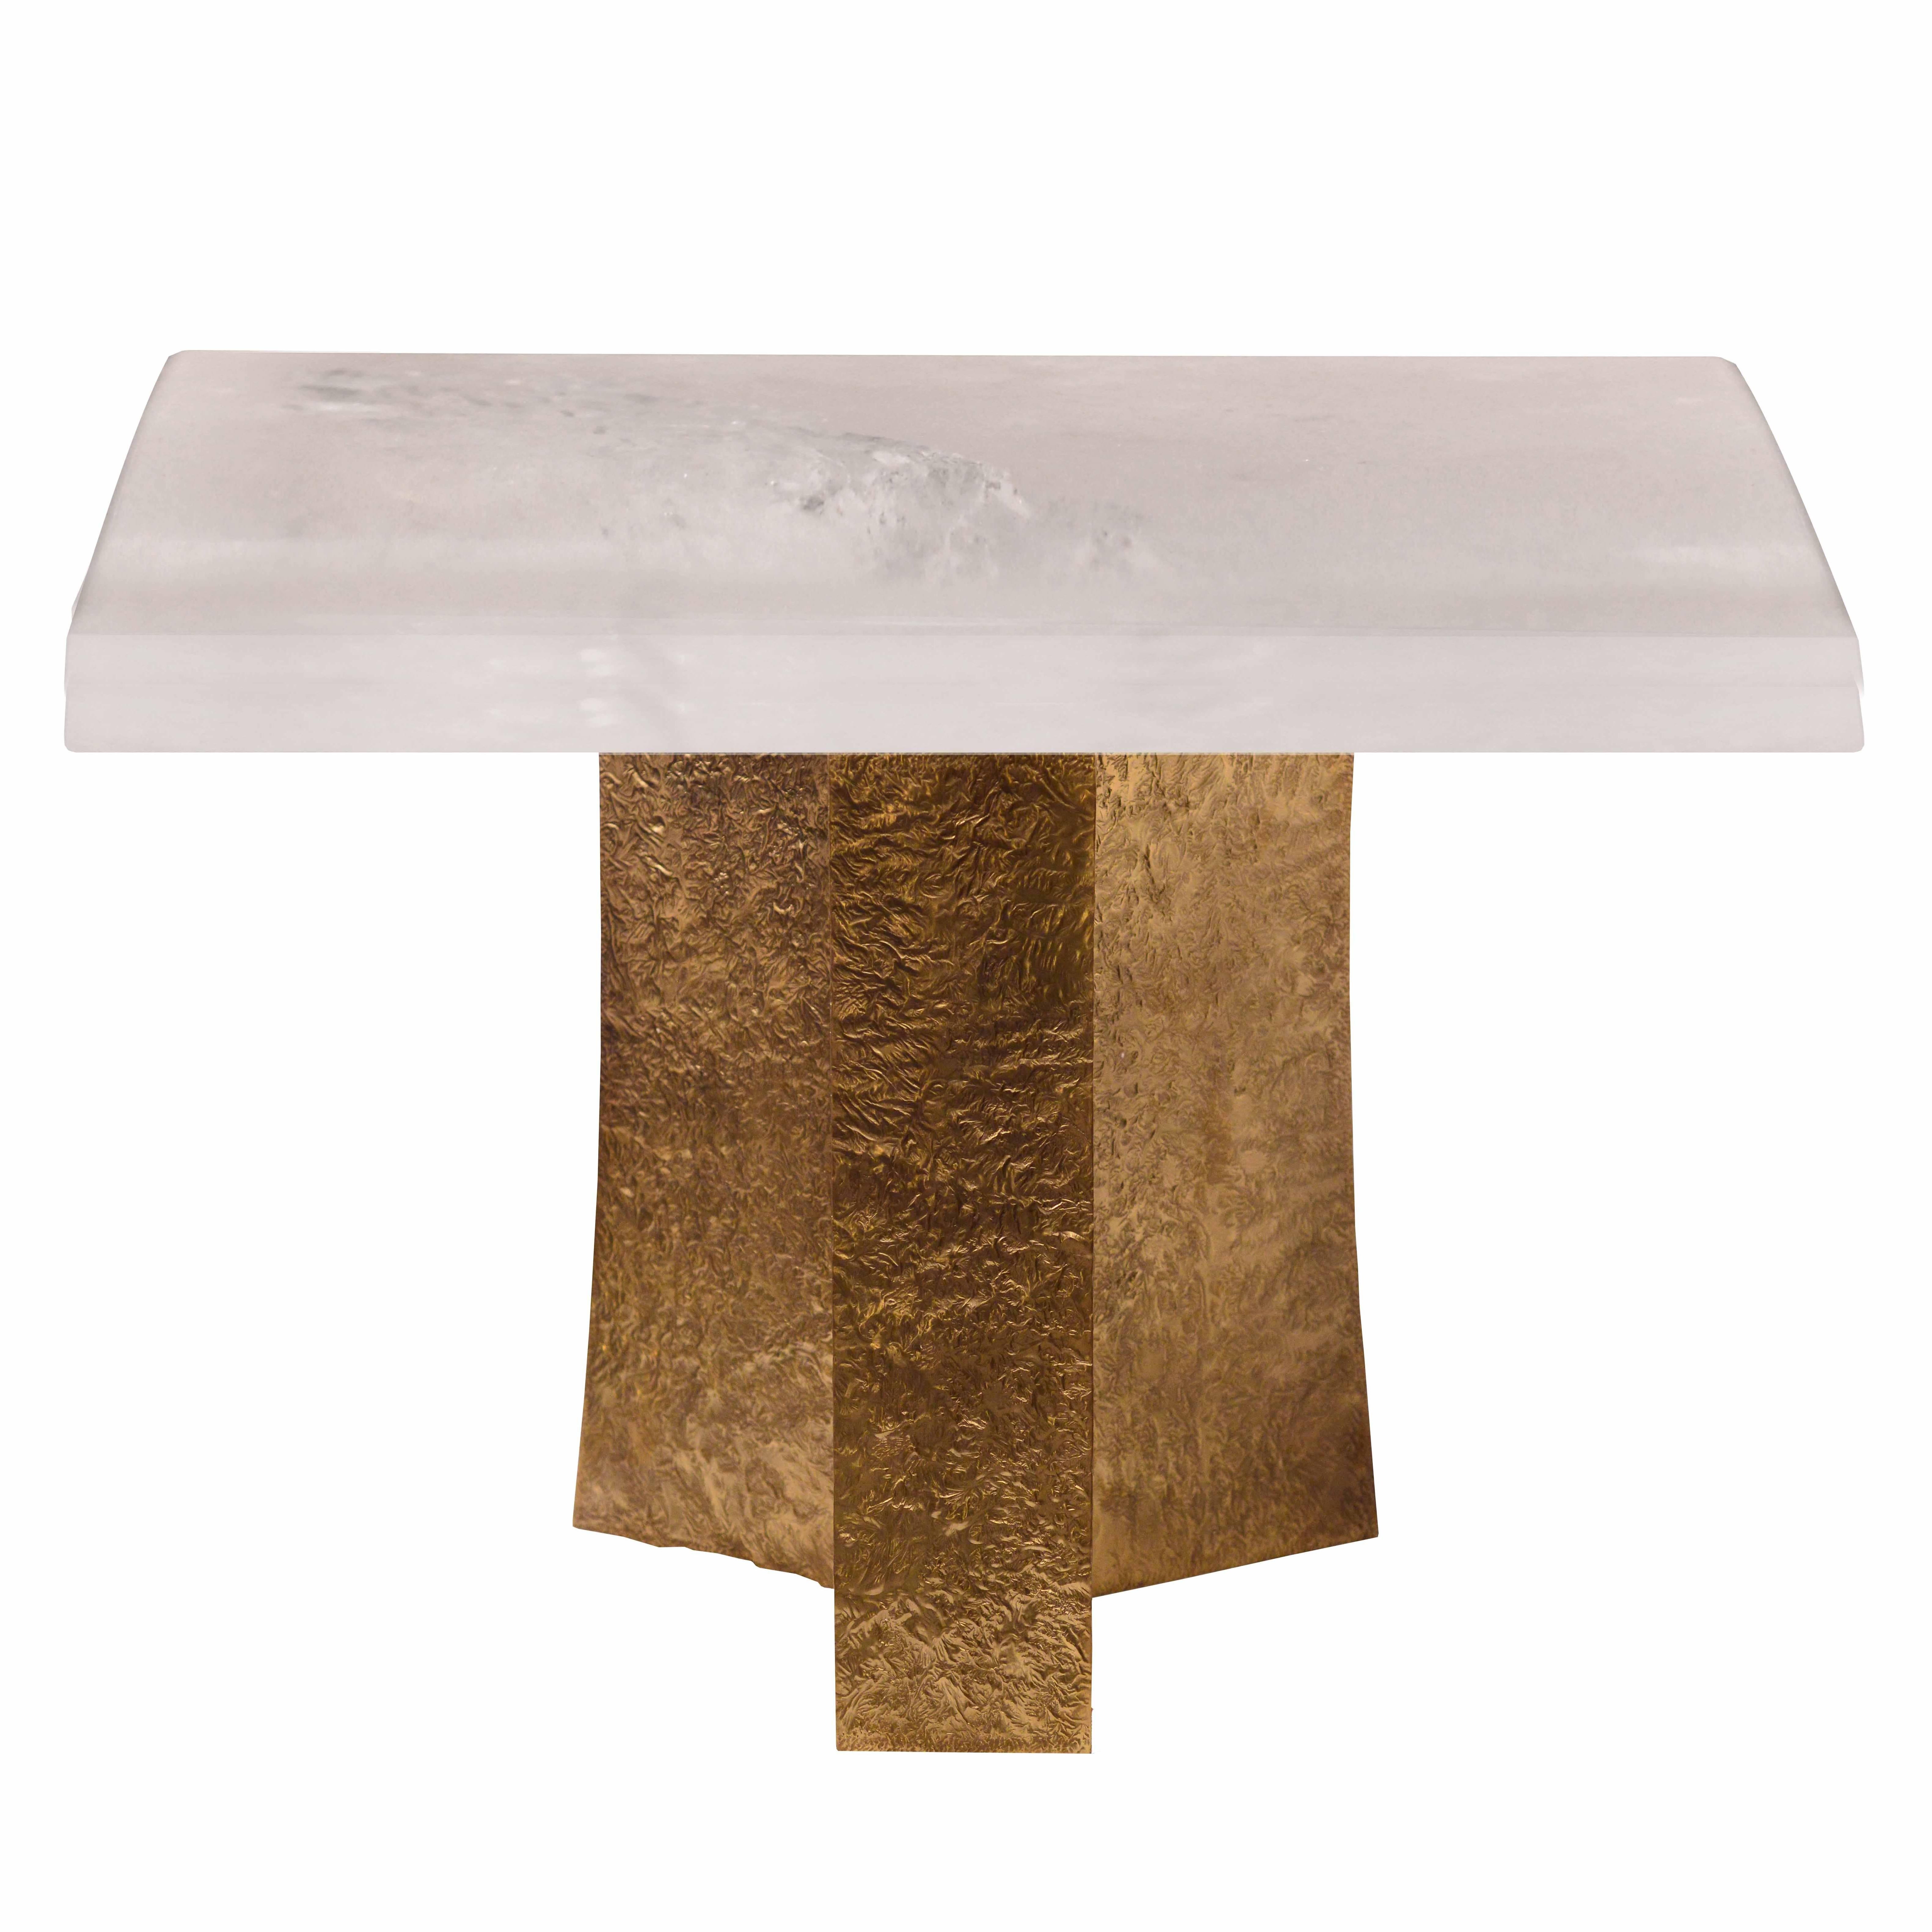 Pair of rock crystal quartz table with hammered polish brass finish metal bases , created by Phoenix Gallery. 

